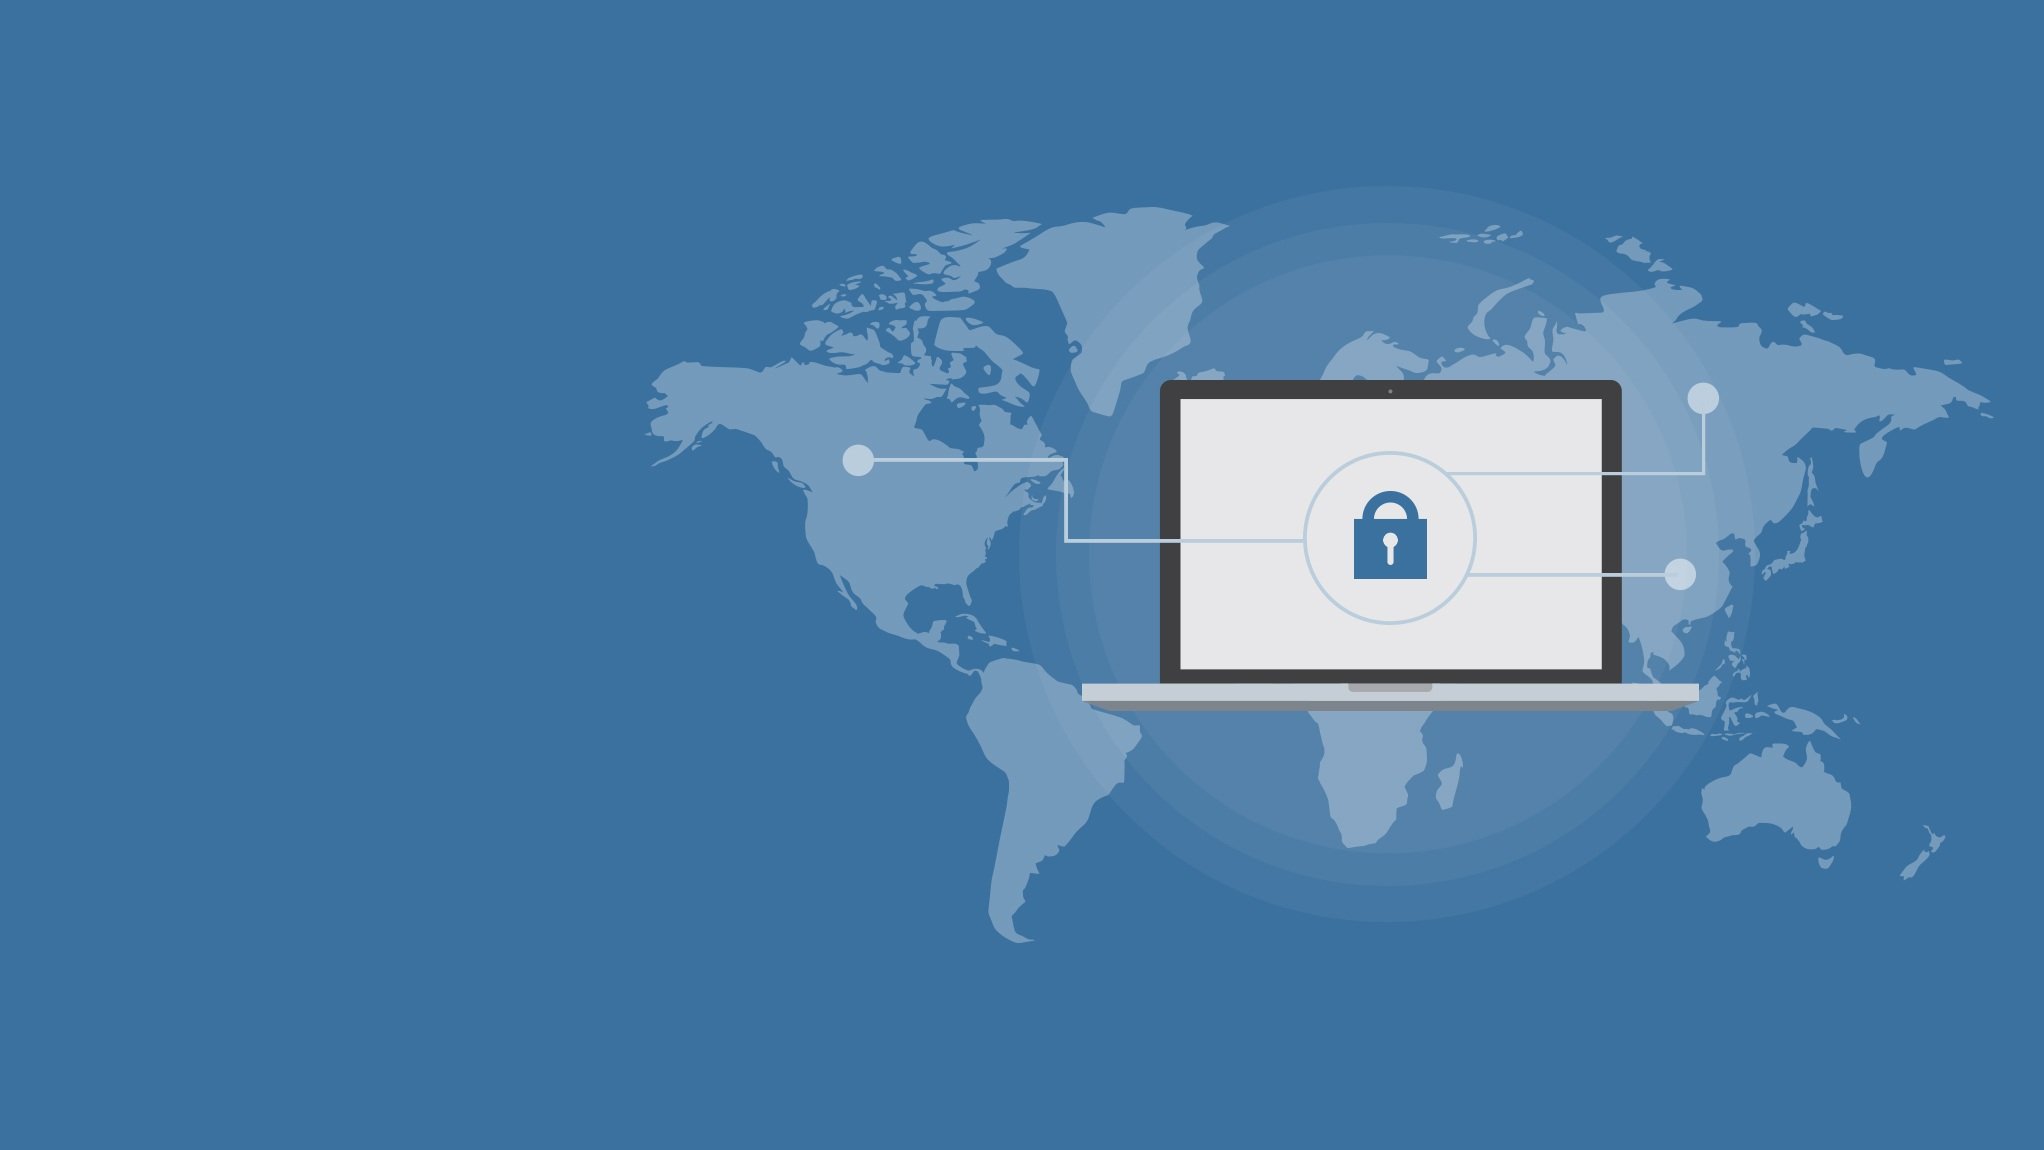 4 Critical Security Requirements for Your Next MA Transaction